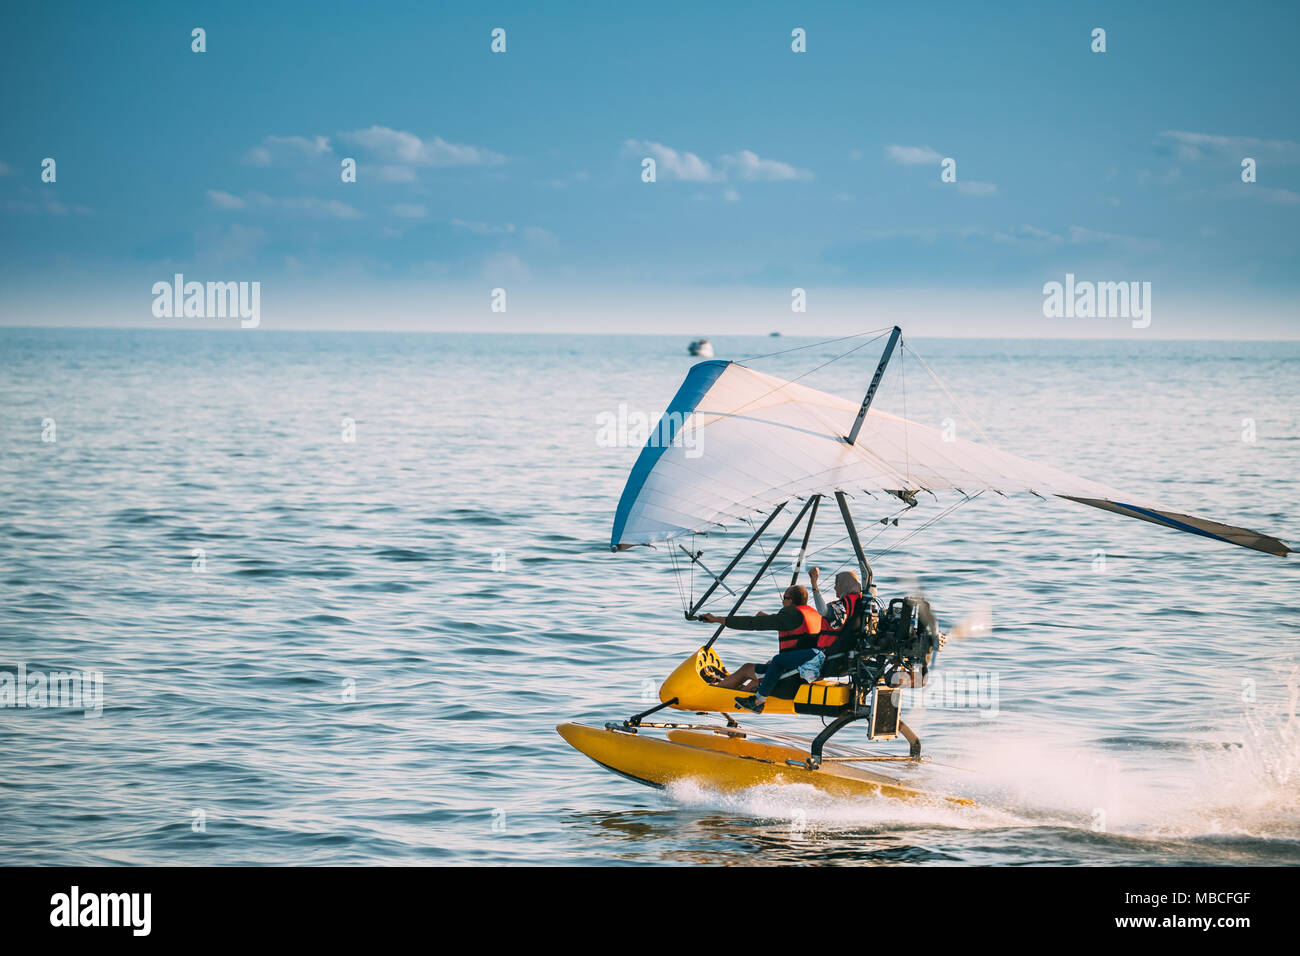 Motorized Hang Glider With Muslim Woman Take Off Frow Sea In Sunny Summer Day. Muslim People Having Fun Stock Photo